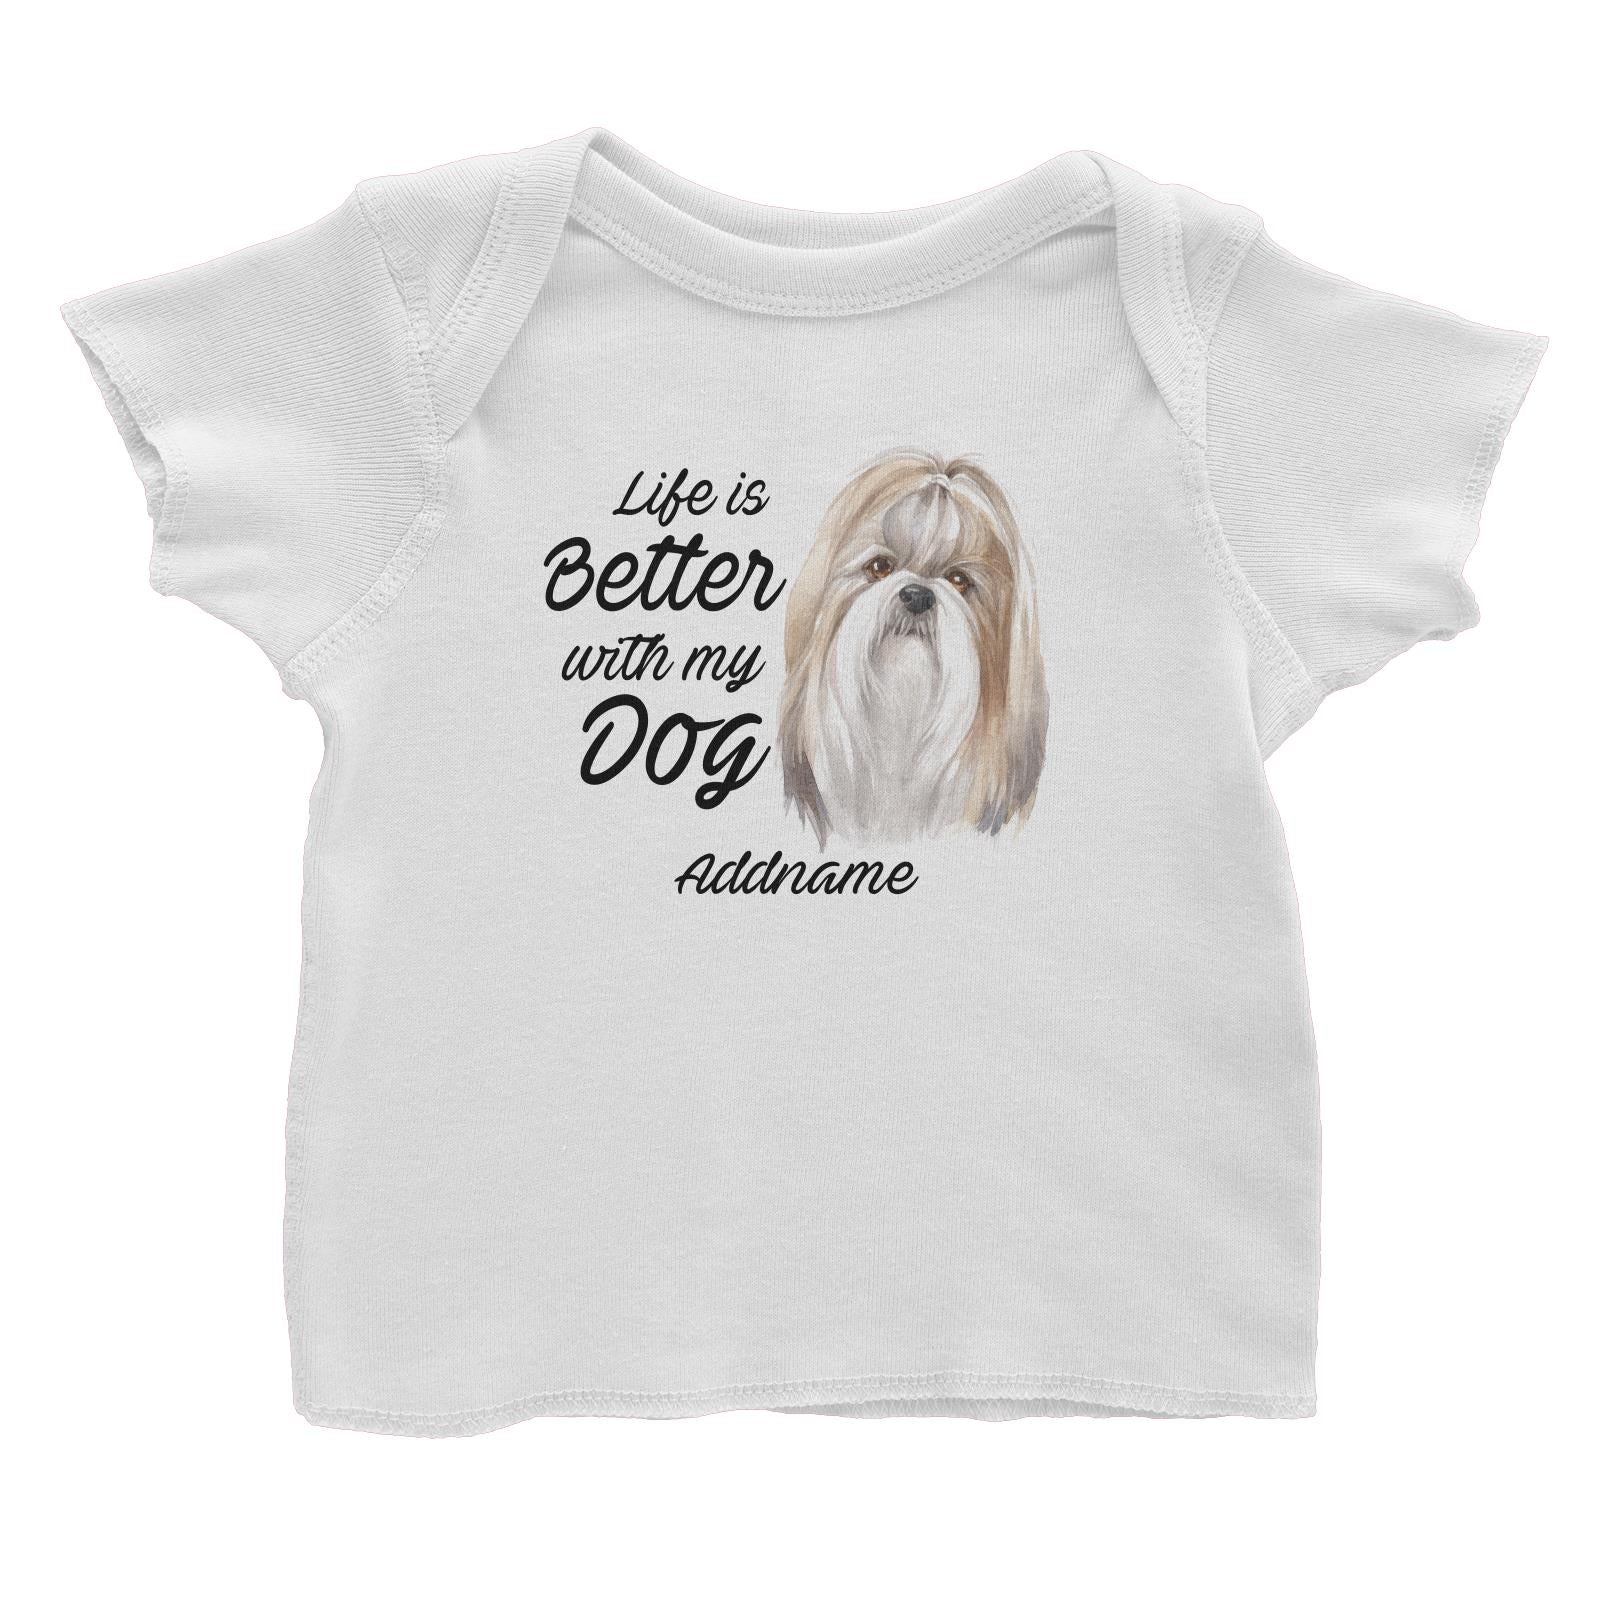 Watercolor Life is Better With My Dog Shih Tzu Addname Baby T-Shirt